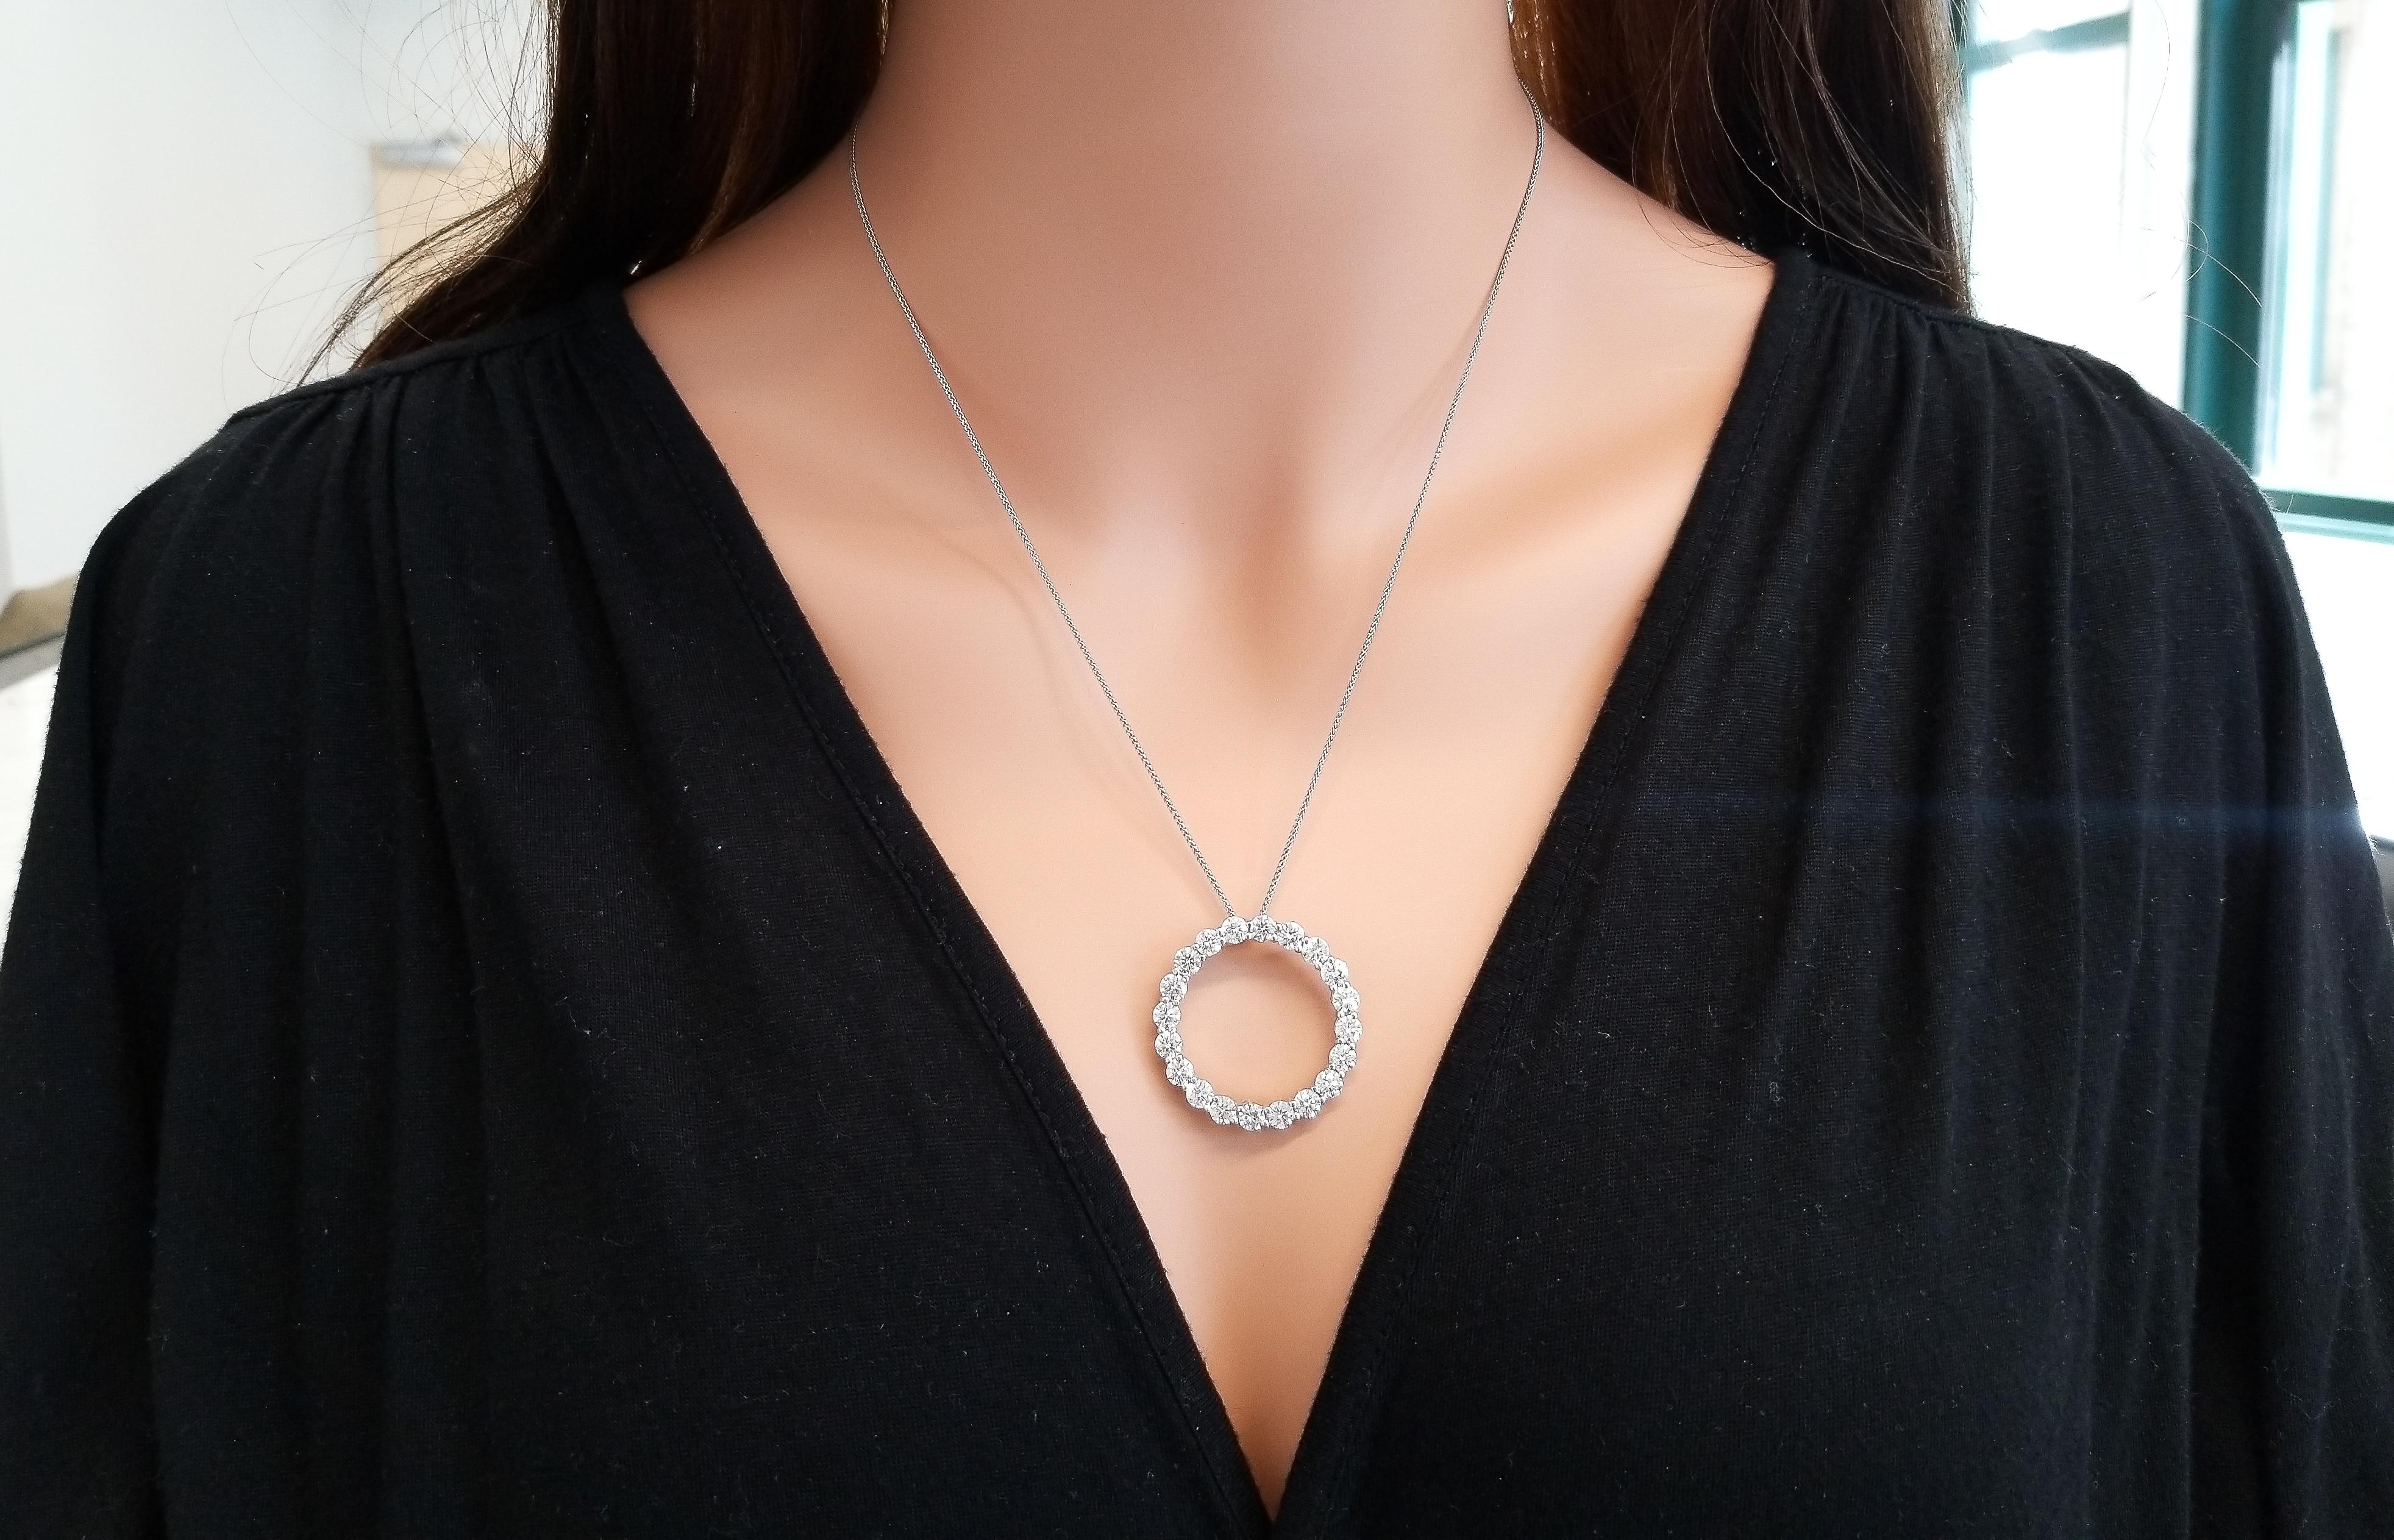 This circle pendant is blazing with fiery round brilliant diamonds. This piece is classic yet bold because of its size. Wear it with your favorite casual attire, or your dressiest dress. Thanks to the high quality 4.72 carat total of glimmering